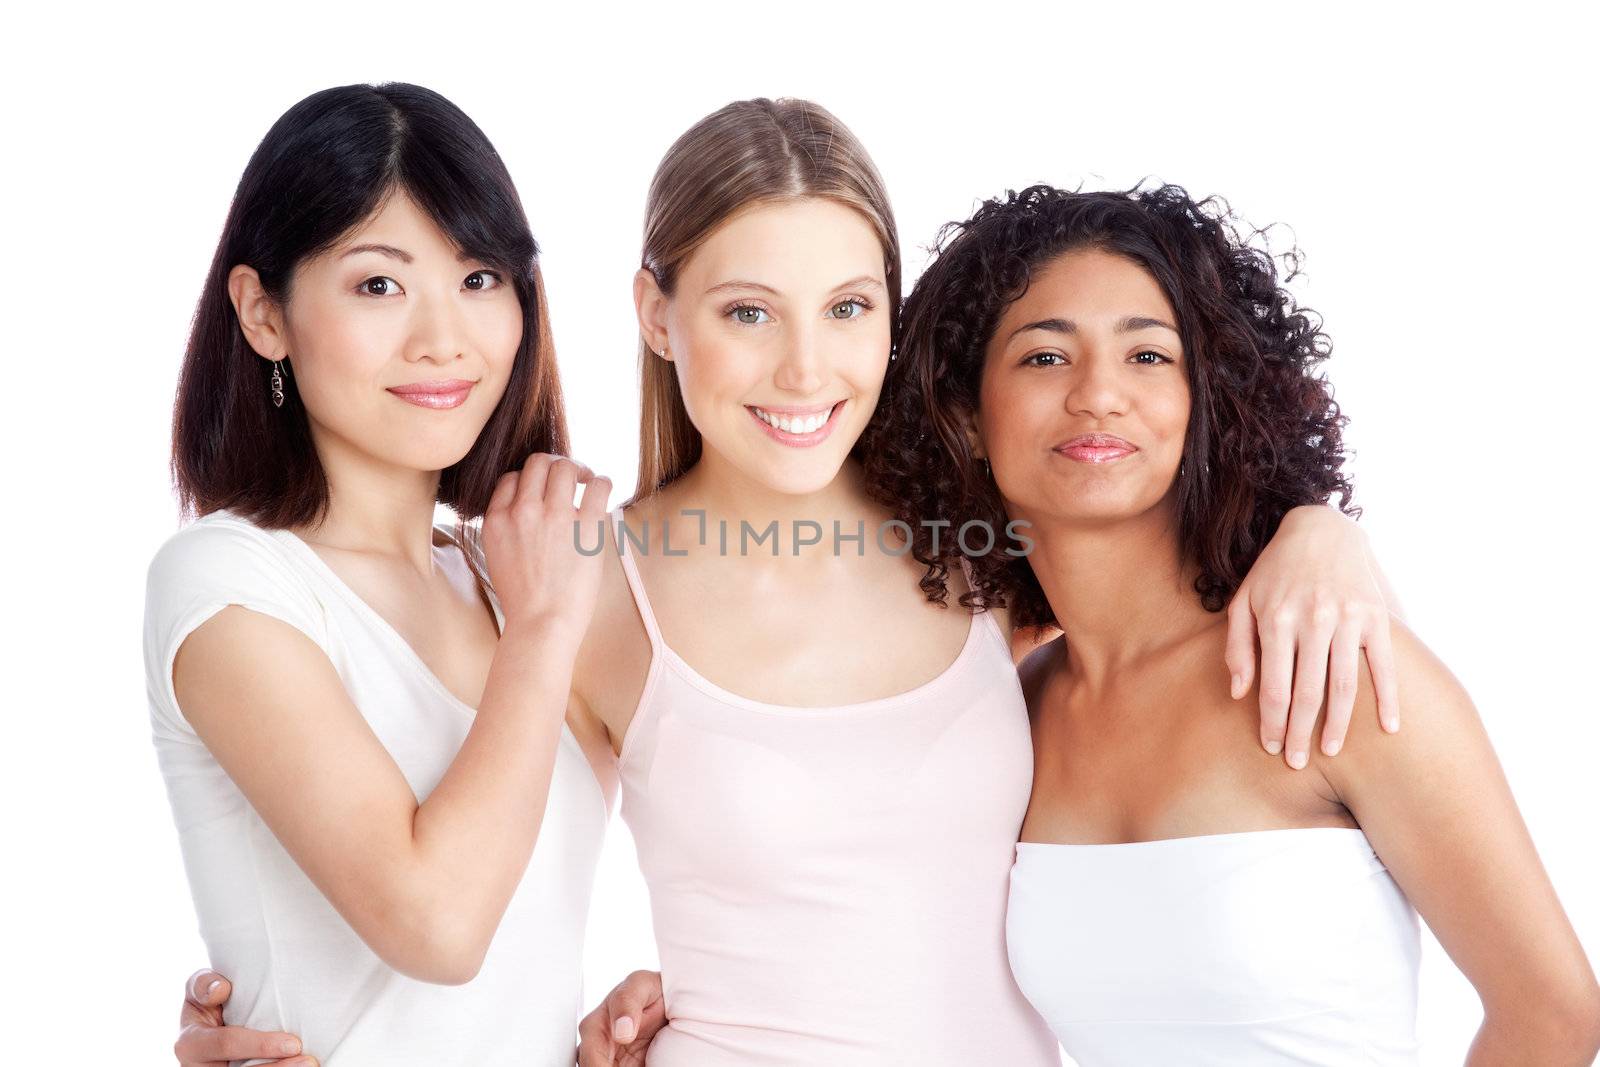 Multiethnic group of young woman isolated on white background.